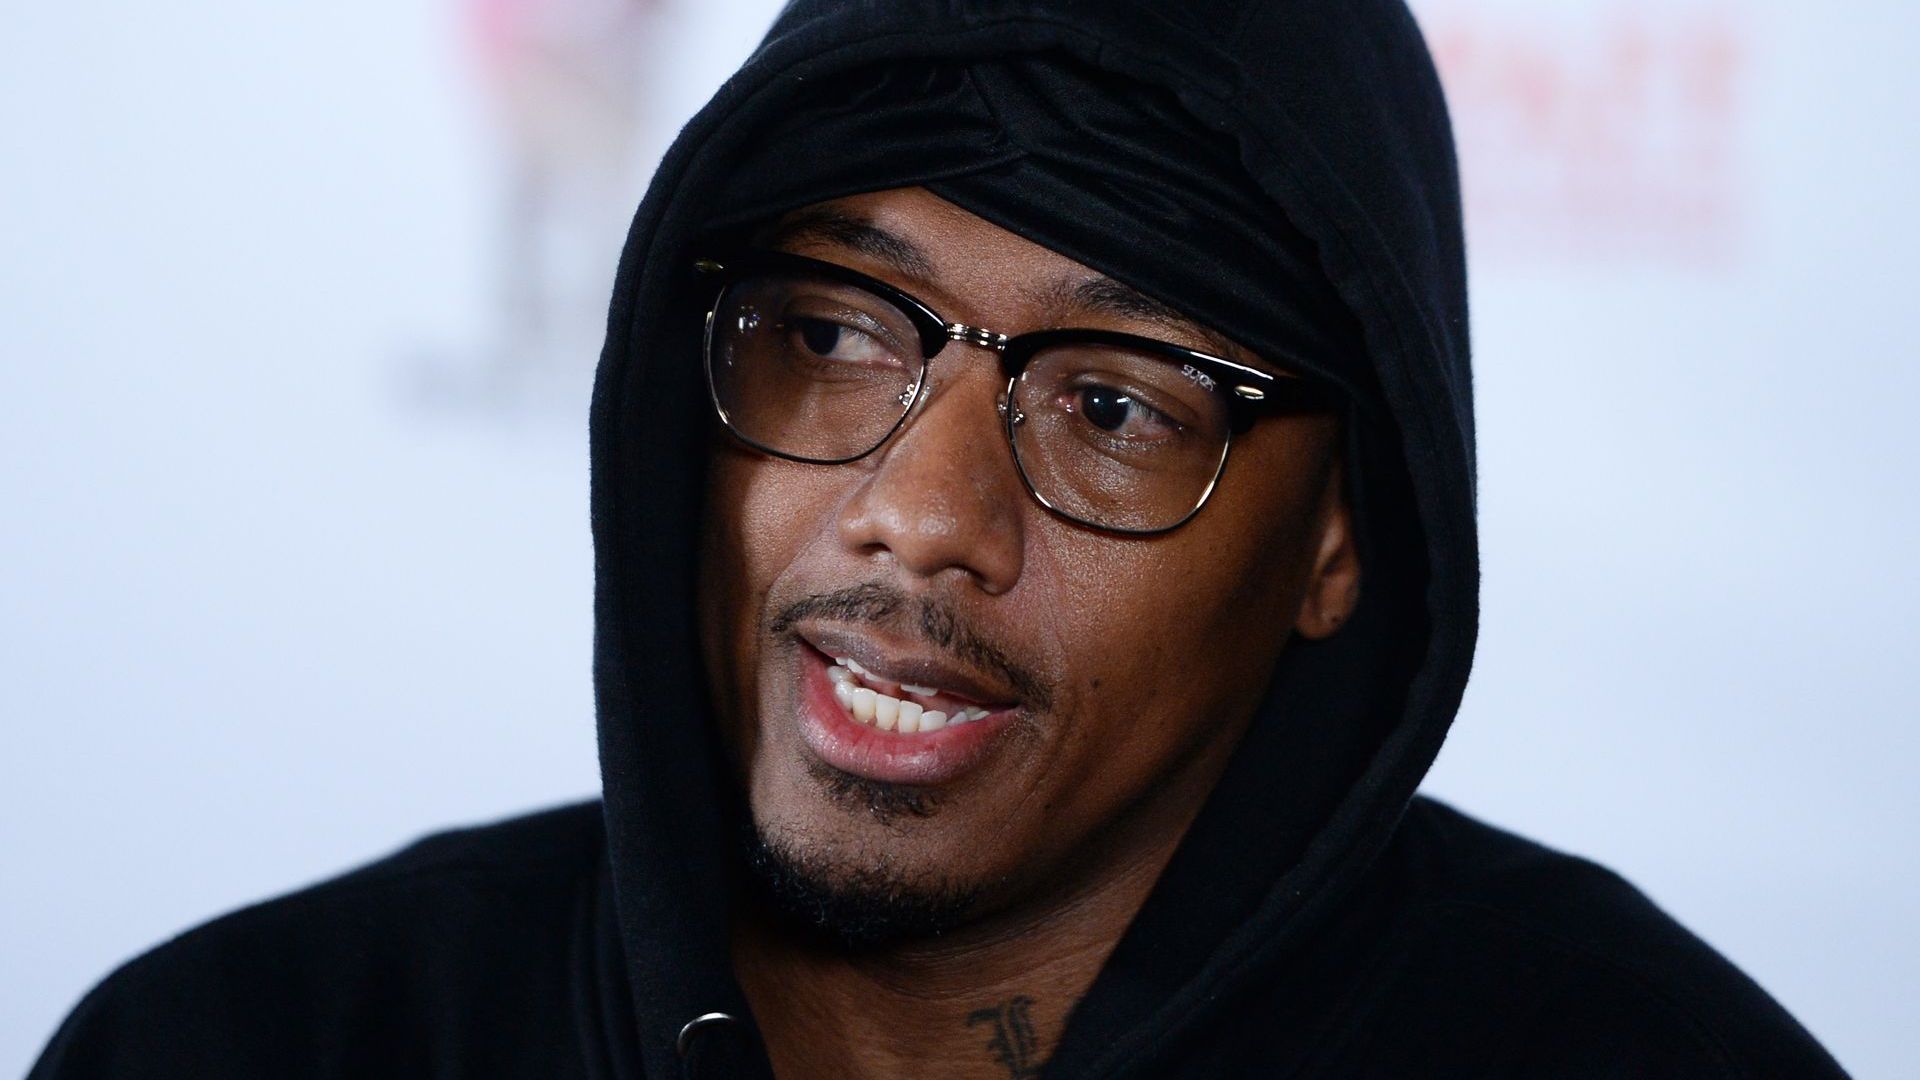 Nick Cannon Expecting Seventh Child, Model Alyssa Scott Appears to Confirm